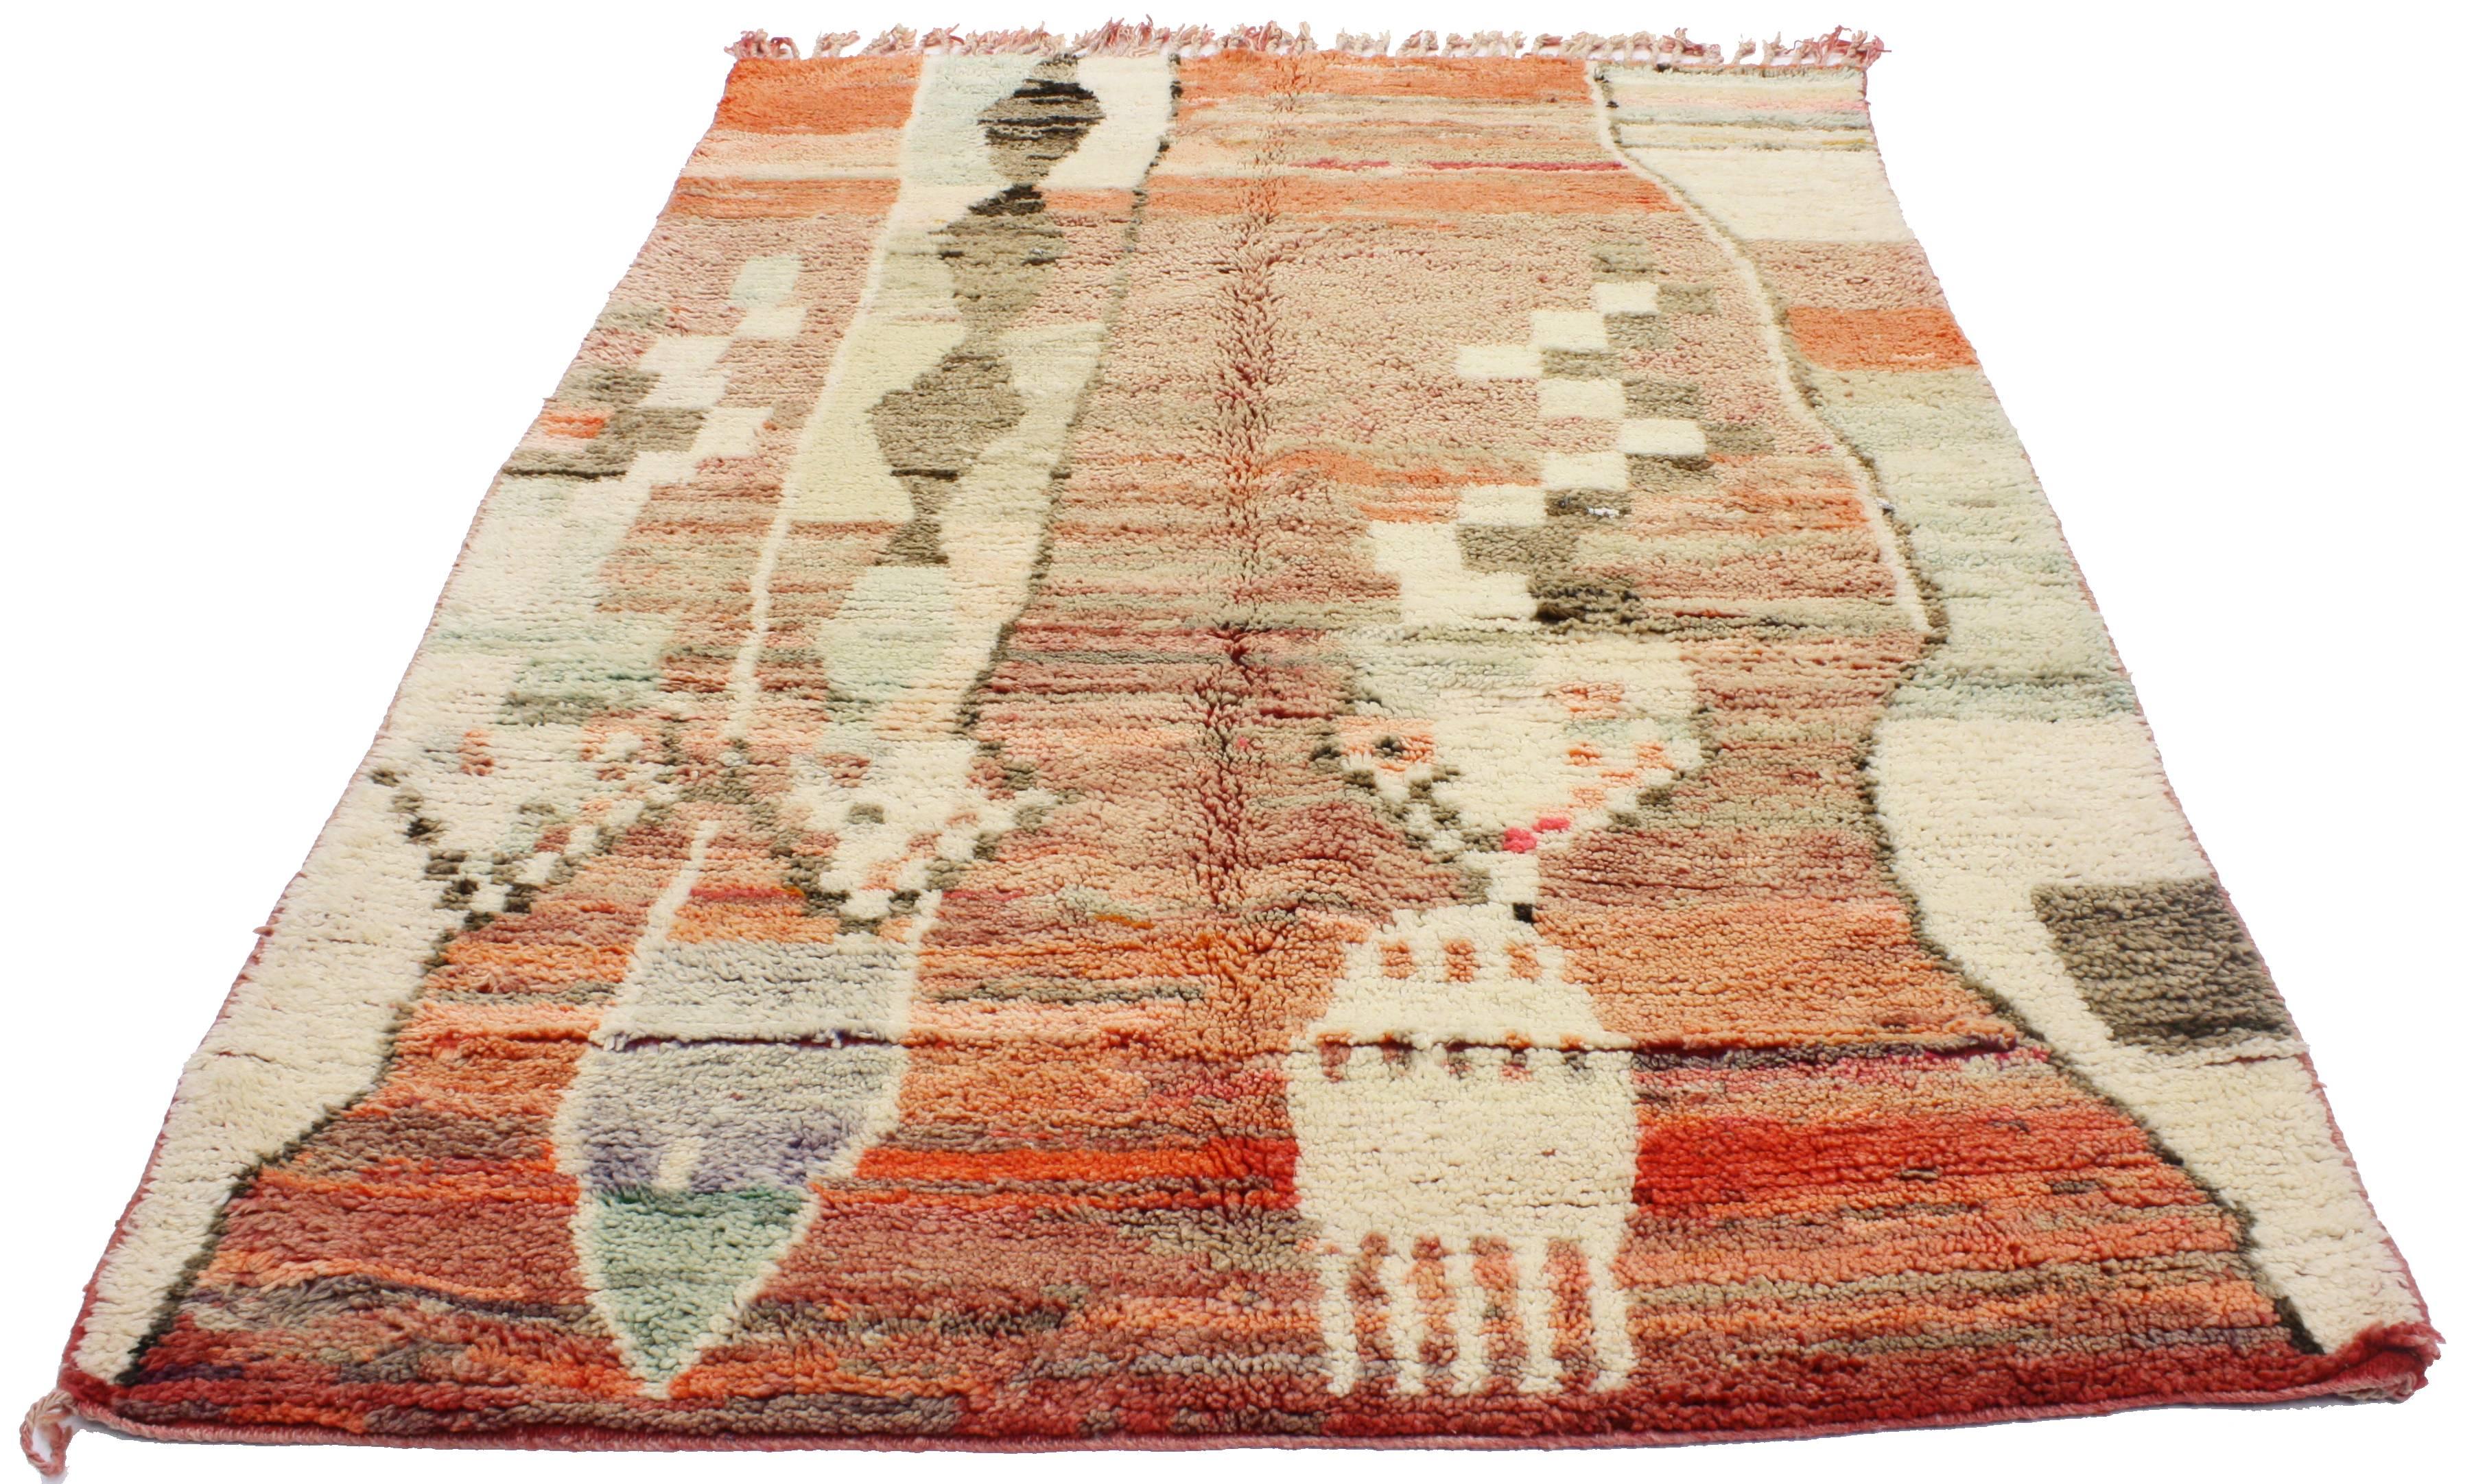 Hand-Crafted Berber Moroccan Rug with Art Deco Design